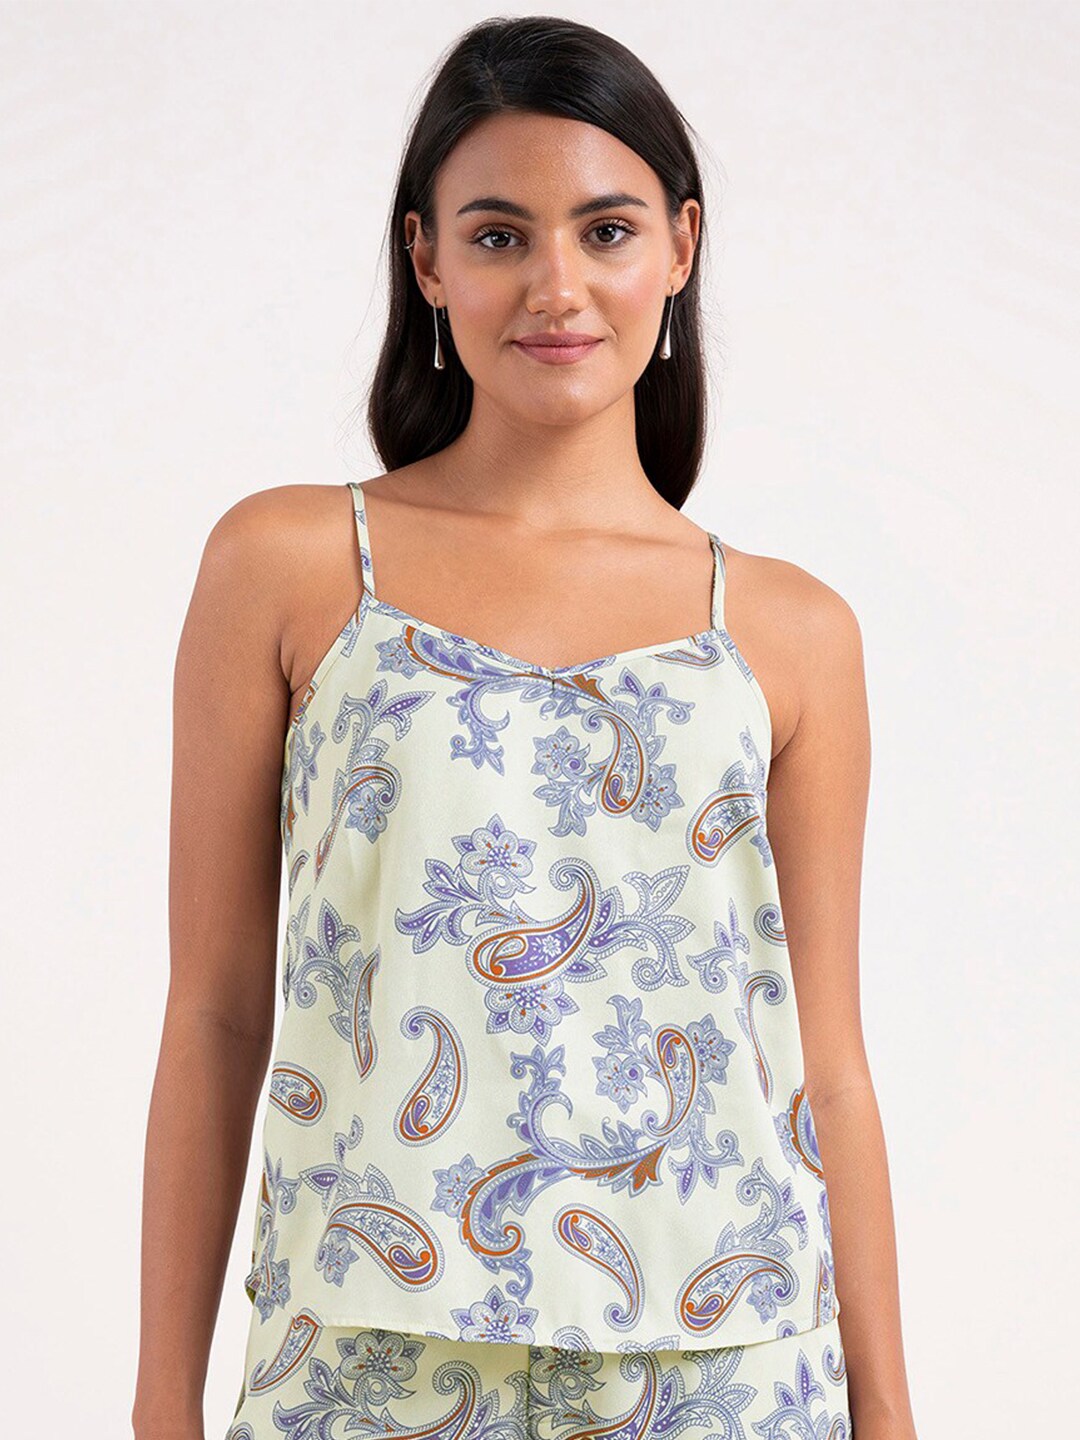 FableStreet Ethnic Motifs Print Top Price in India